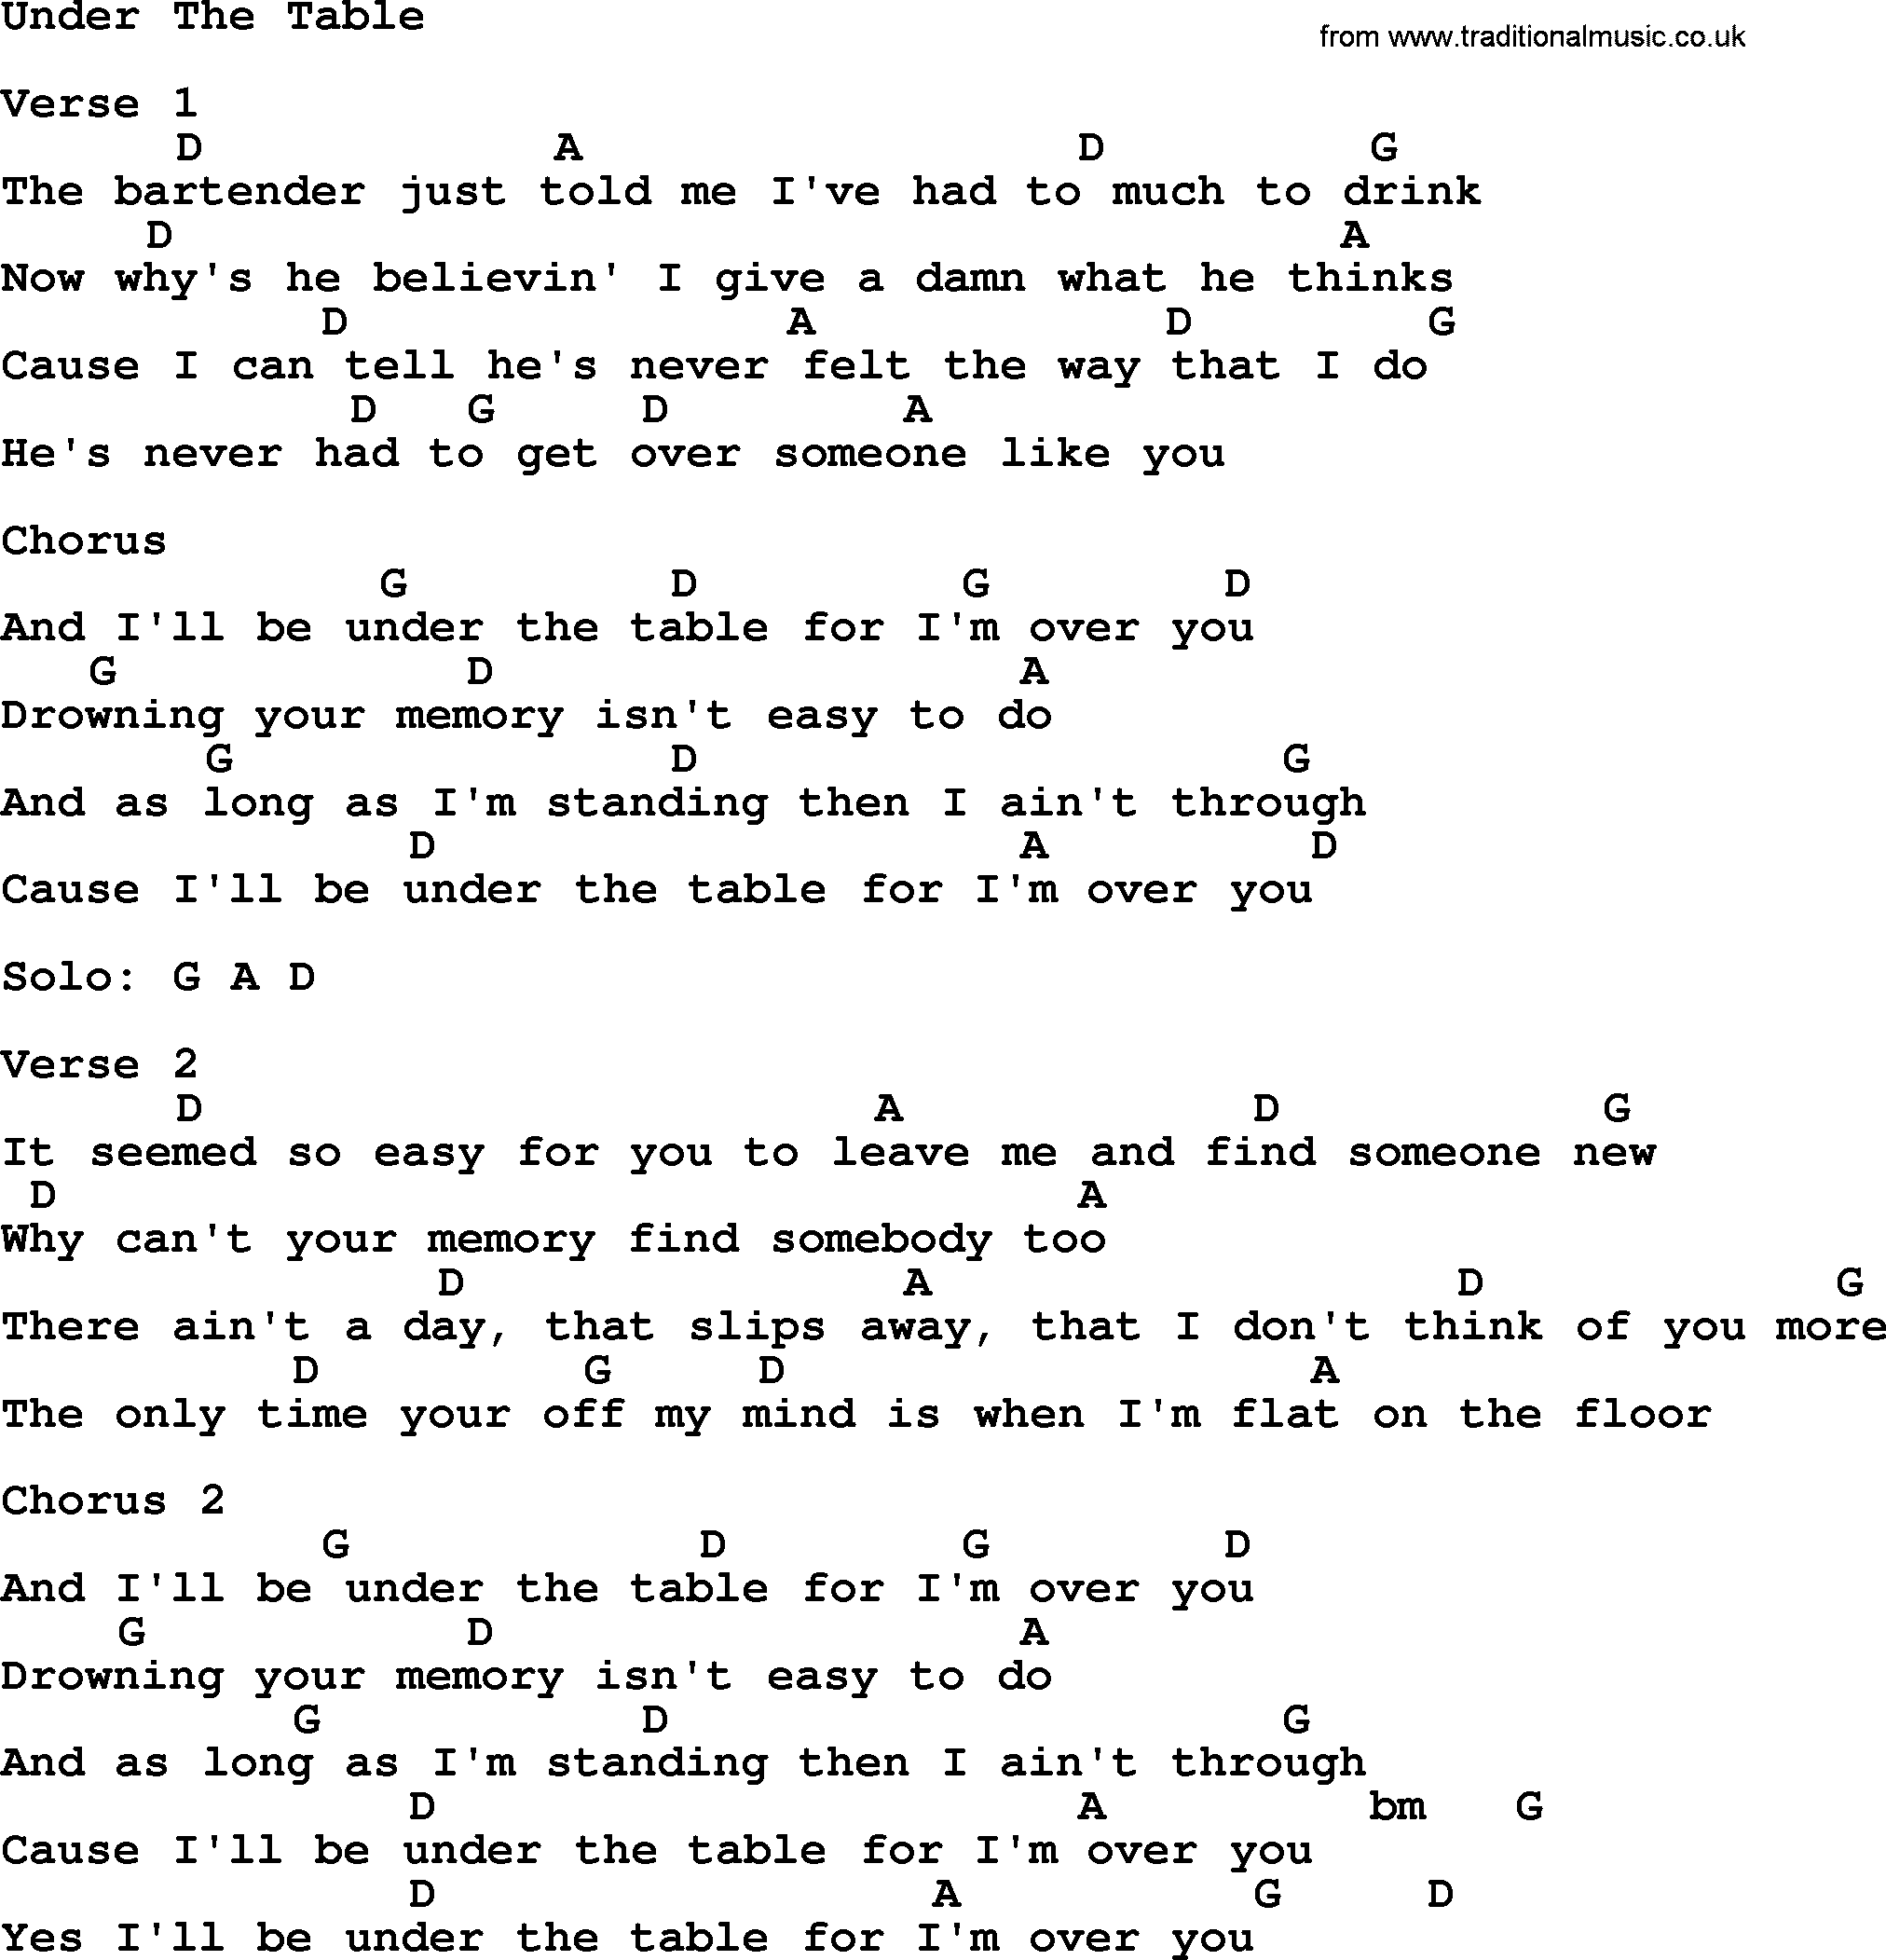 Garth Brooks song: Under The Table, lyrics and chords